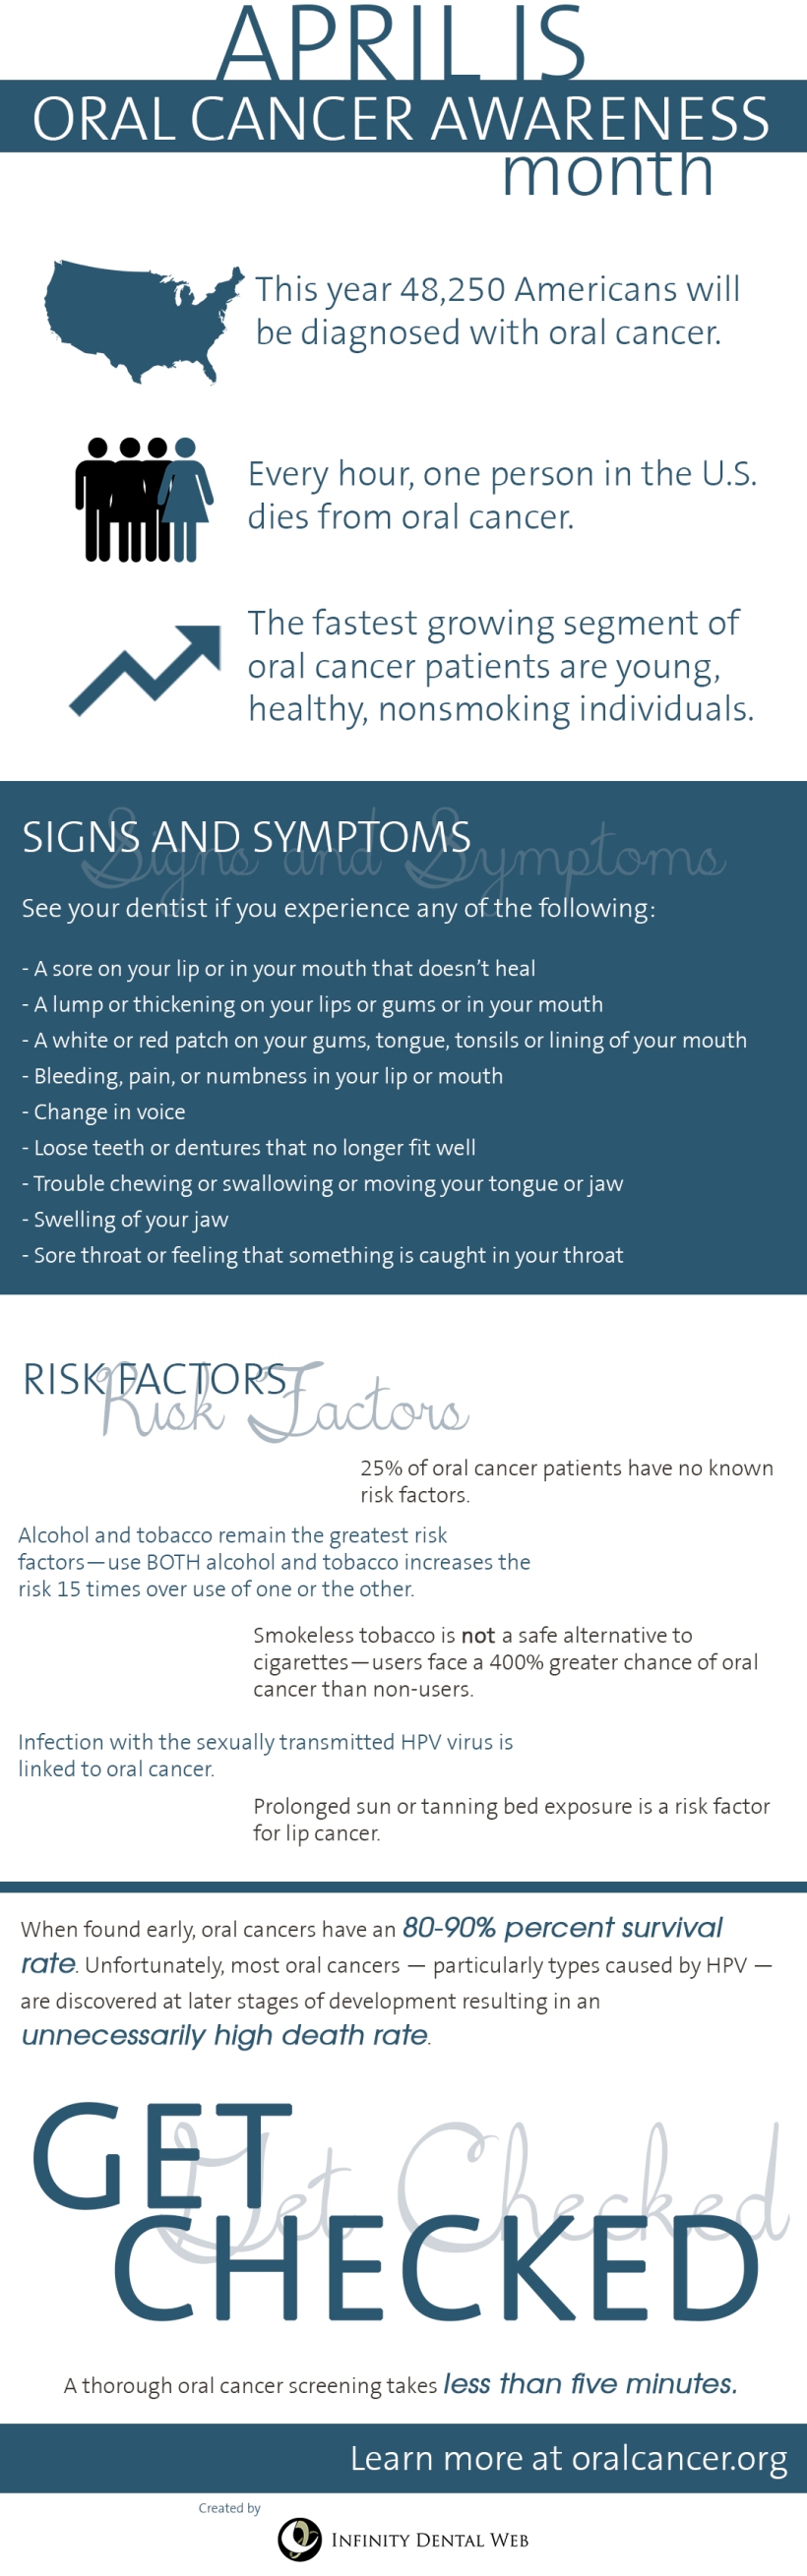 Oral_Cancer_Awareness_Month_Infographic_1080x3450.jpg